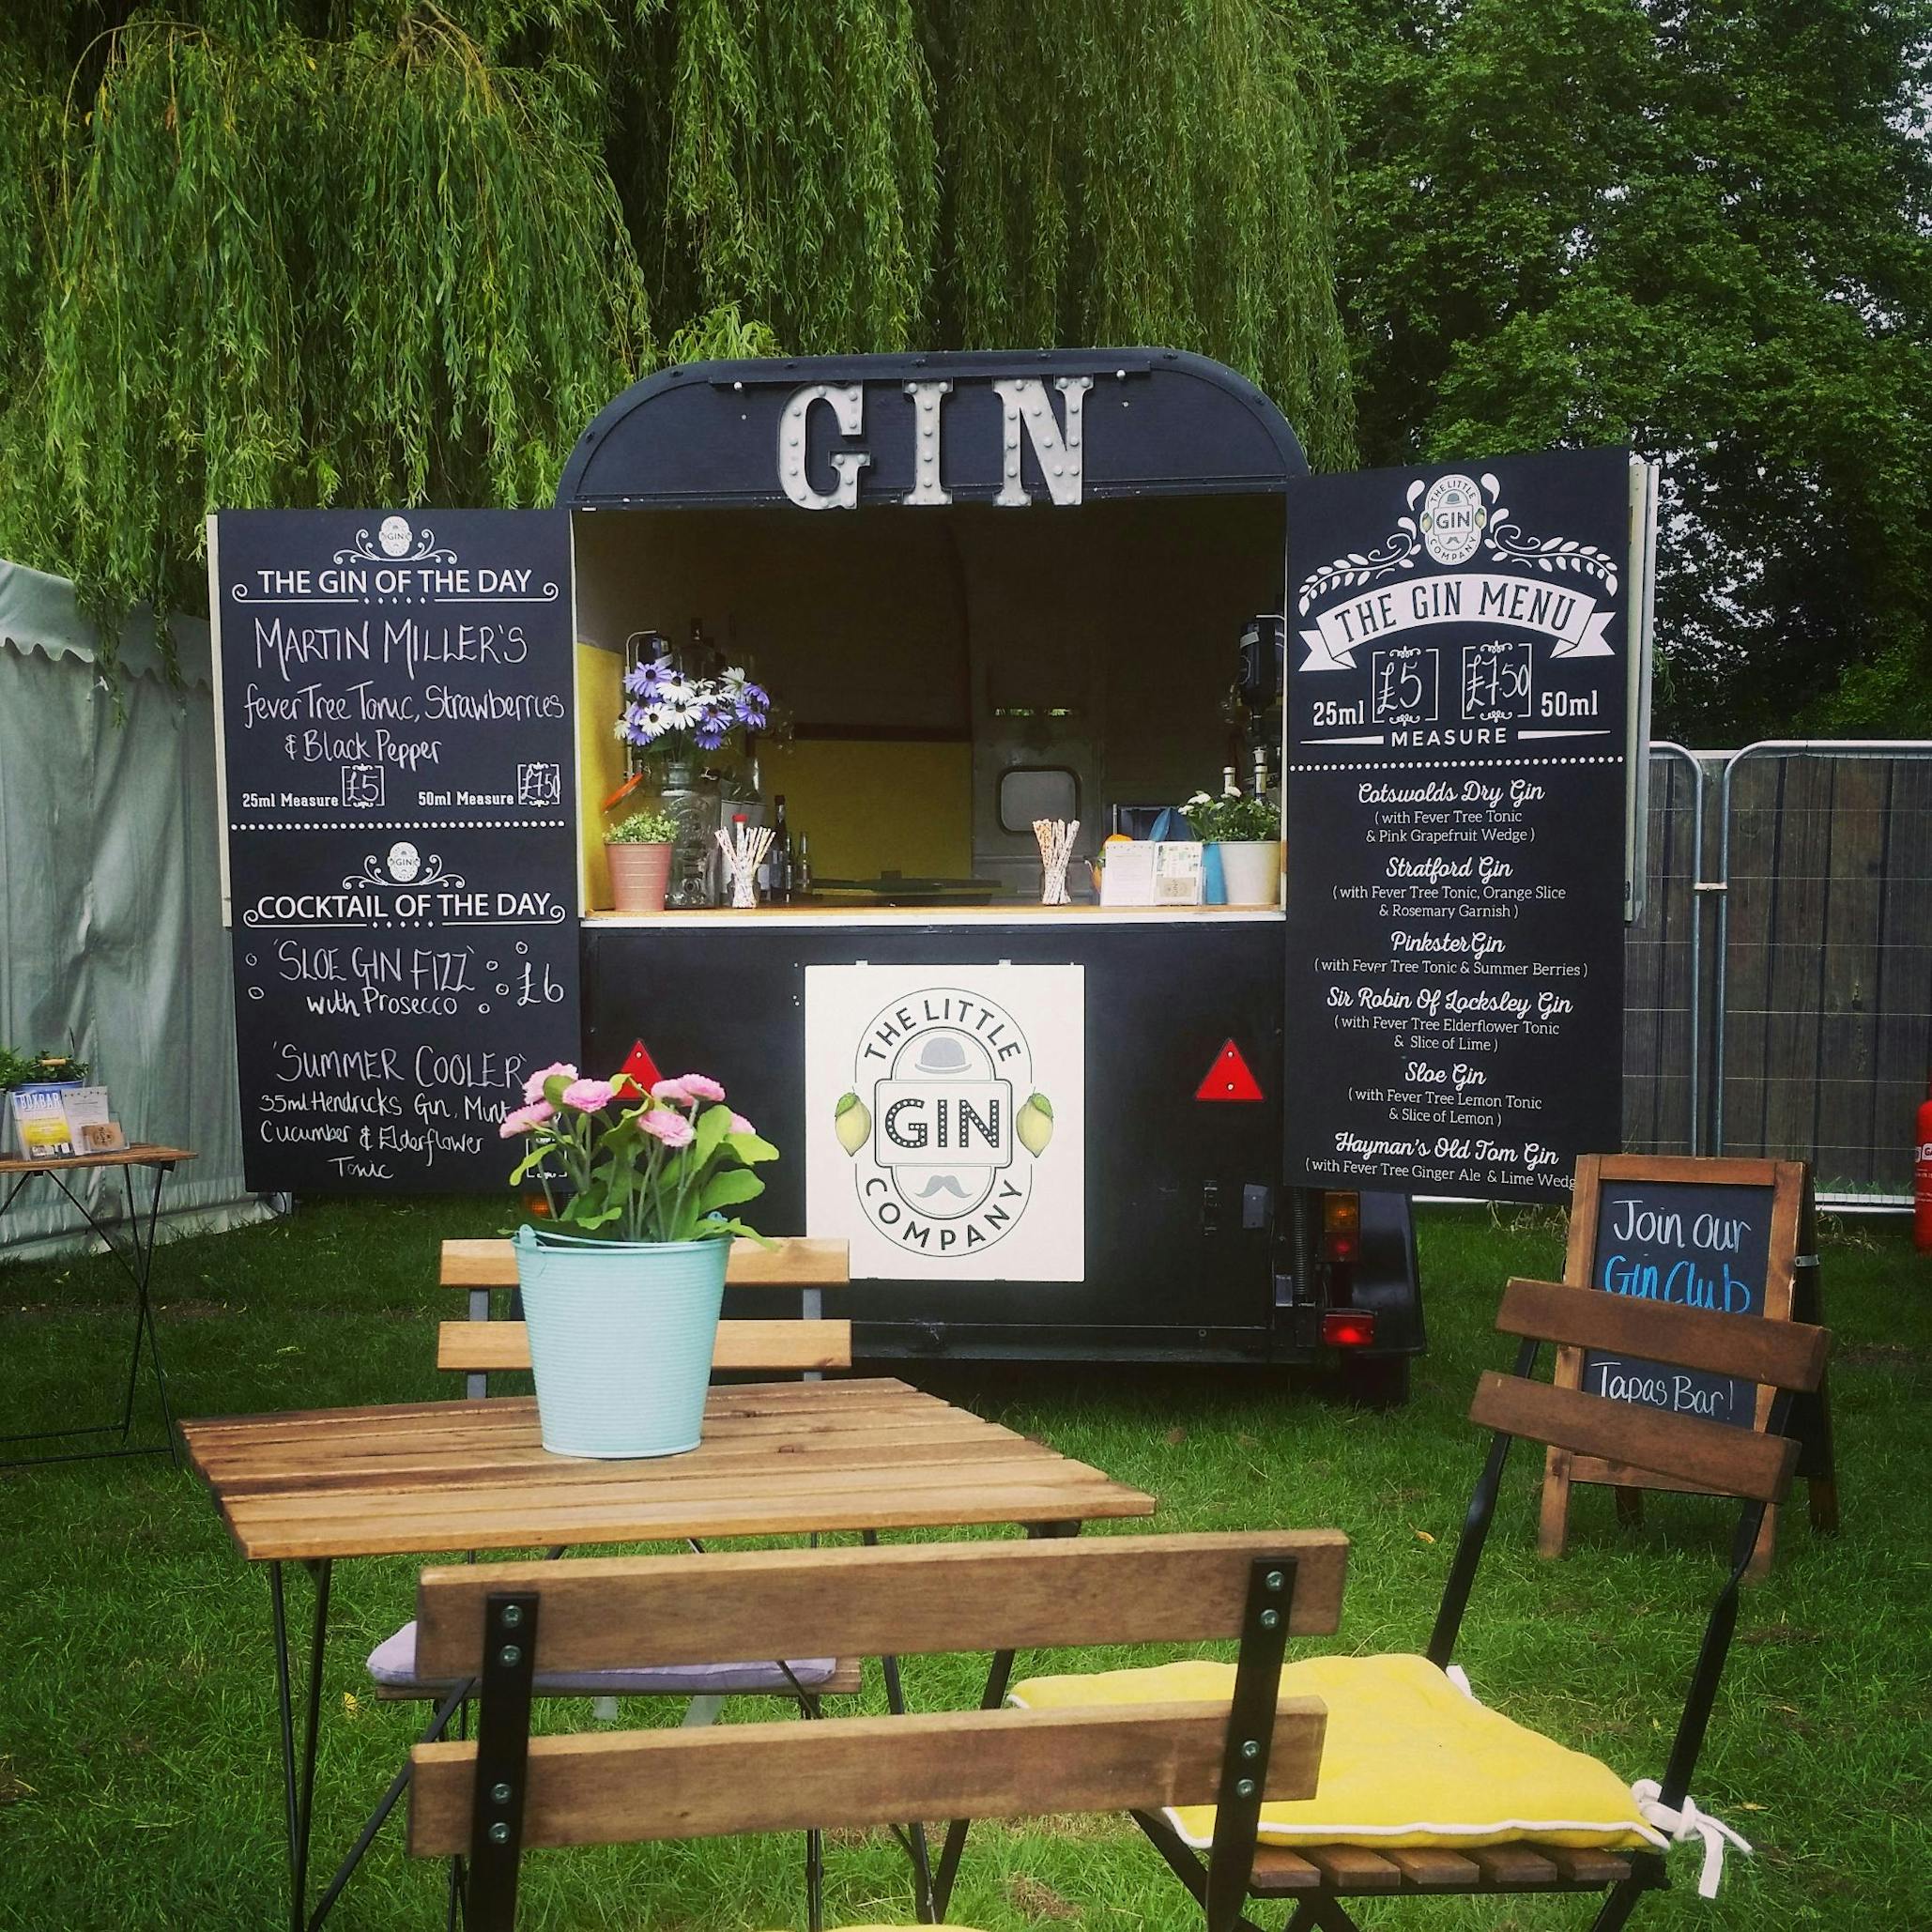 Which lucky member won a visit from this amazing mobile gin bar?